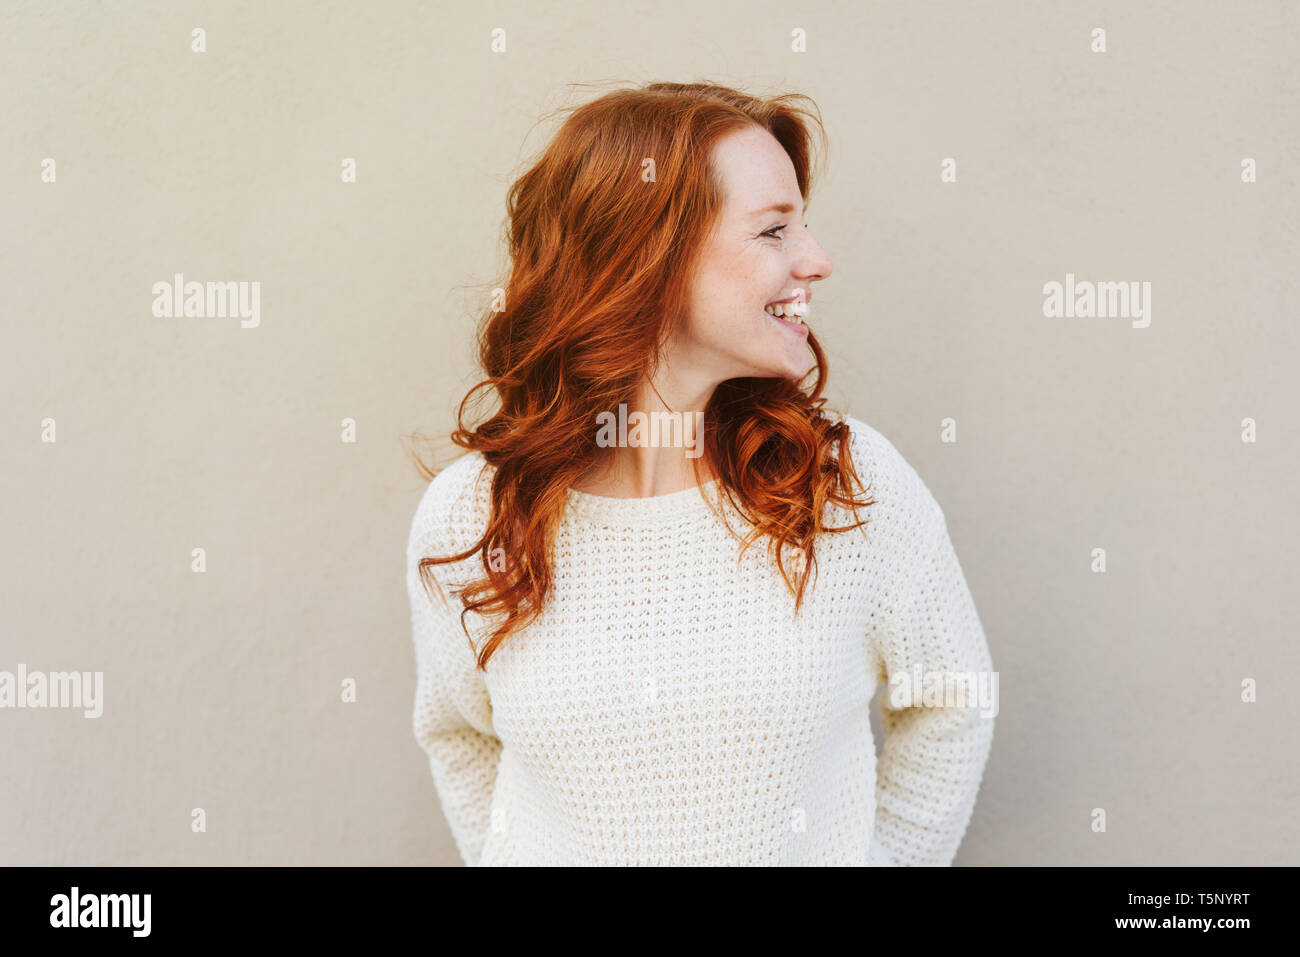 Front portrait of young red-hared woman in white sweater, smiling and looking away, standing against grey wall with her head turn left Stock Photo